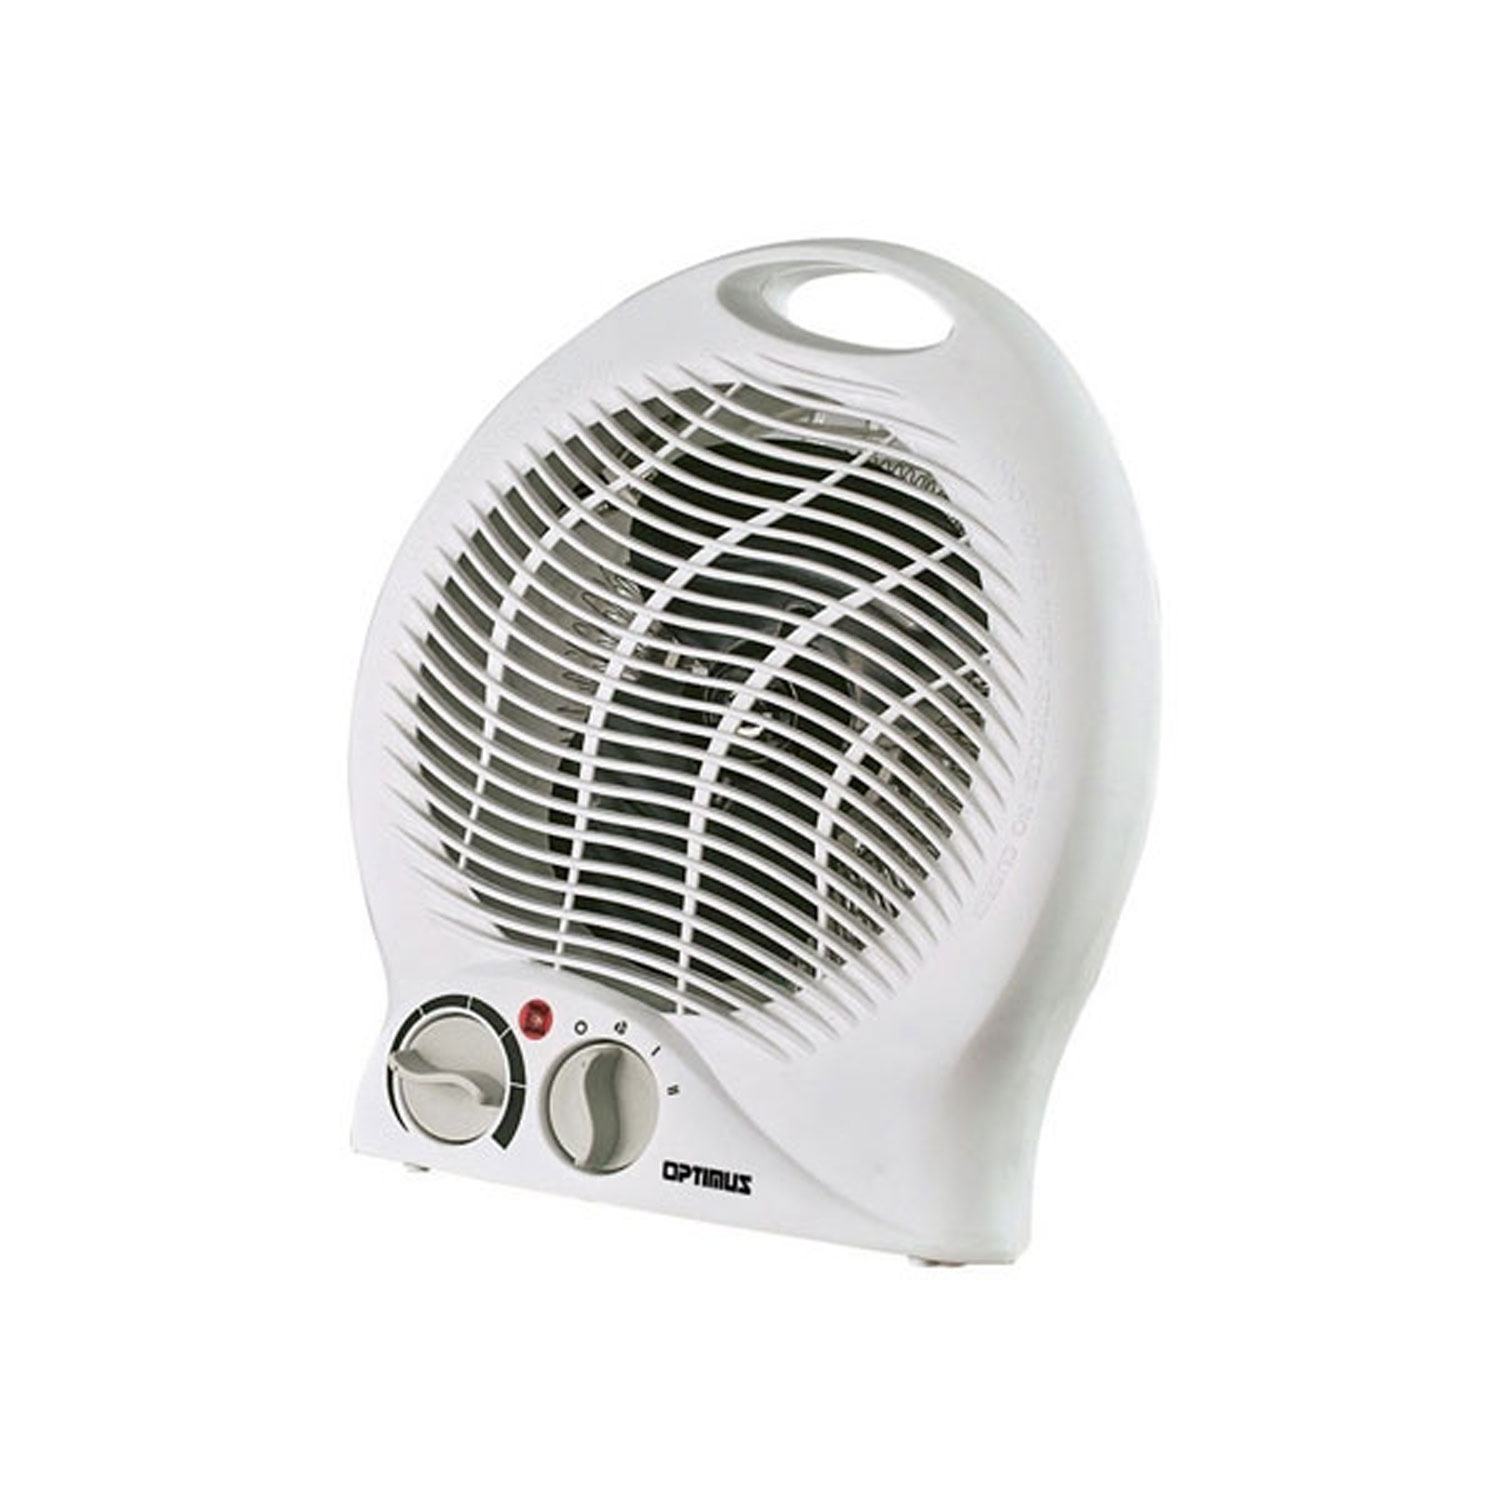 Chef'sChoice 97078843M Portable Fan Heater with Thermostat